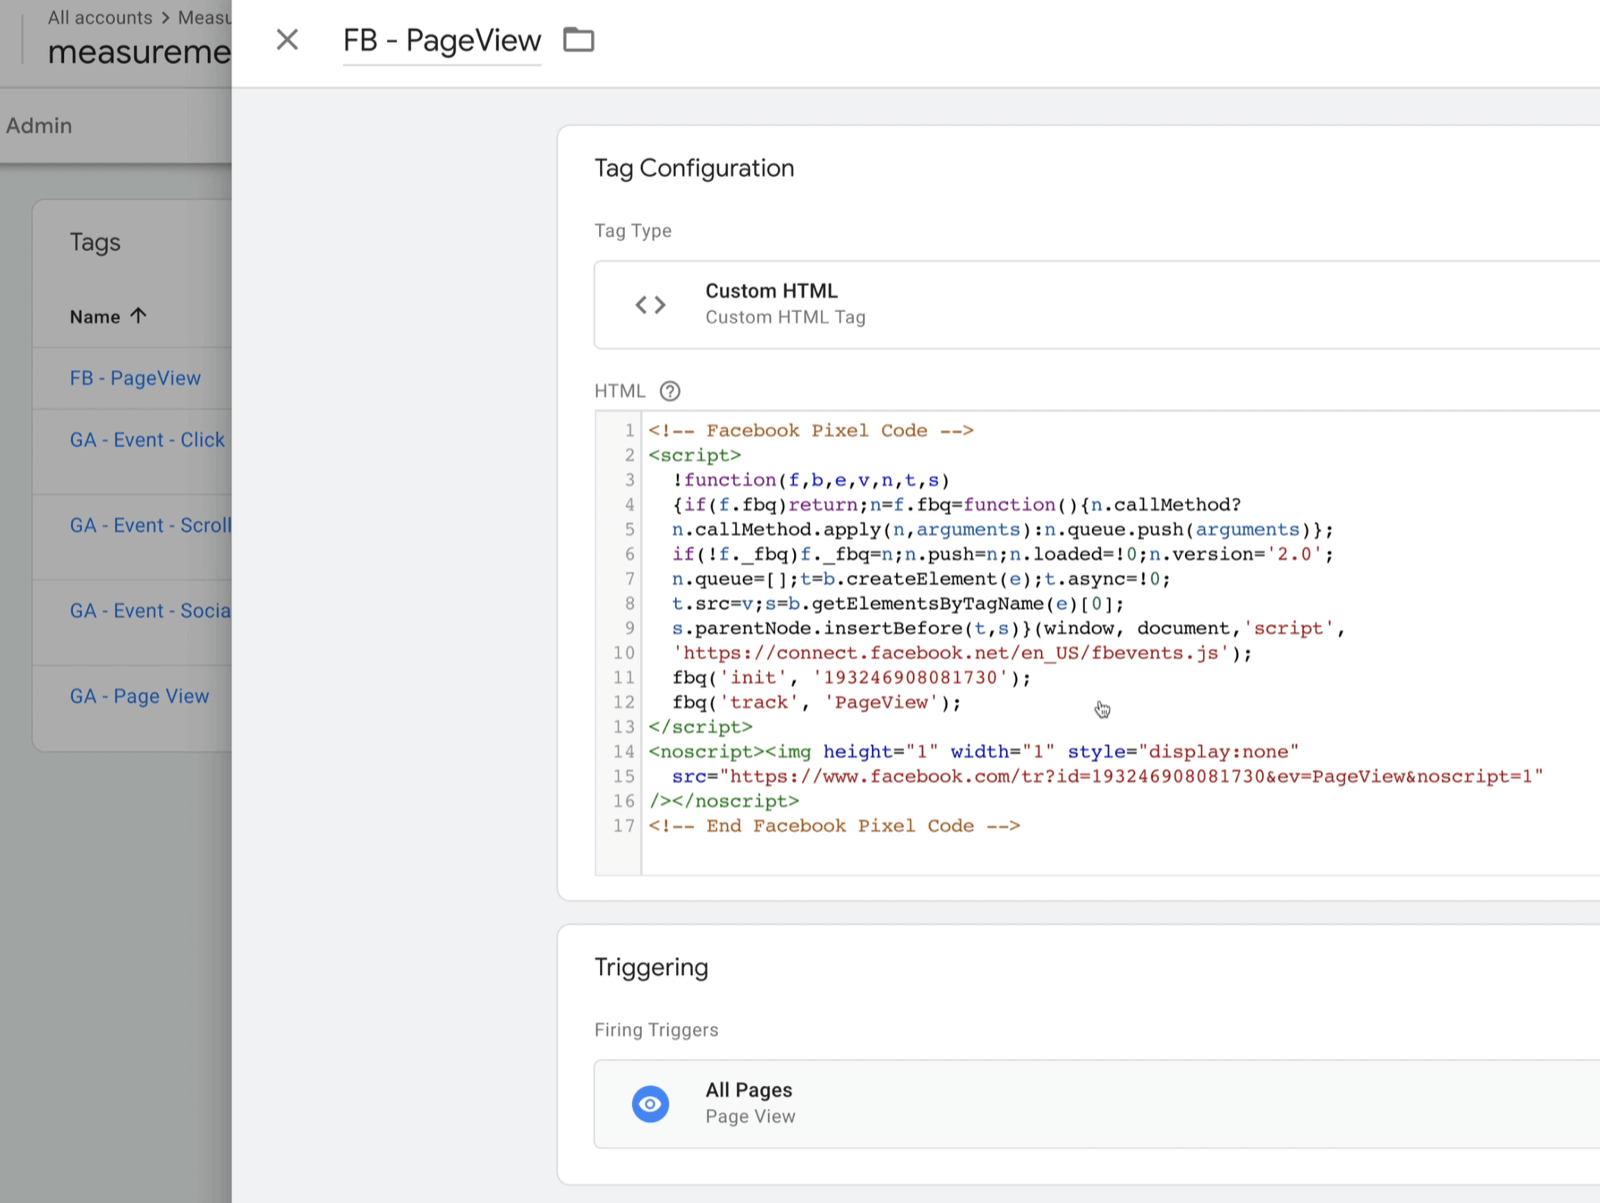 example google tag manager tag configuration called fb pageview with tag type set to custom html with some html code, with firing triggers set to all pages